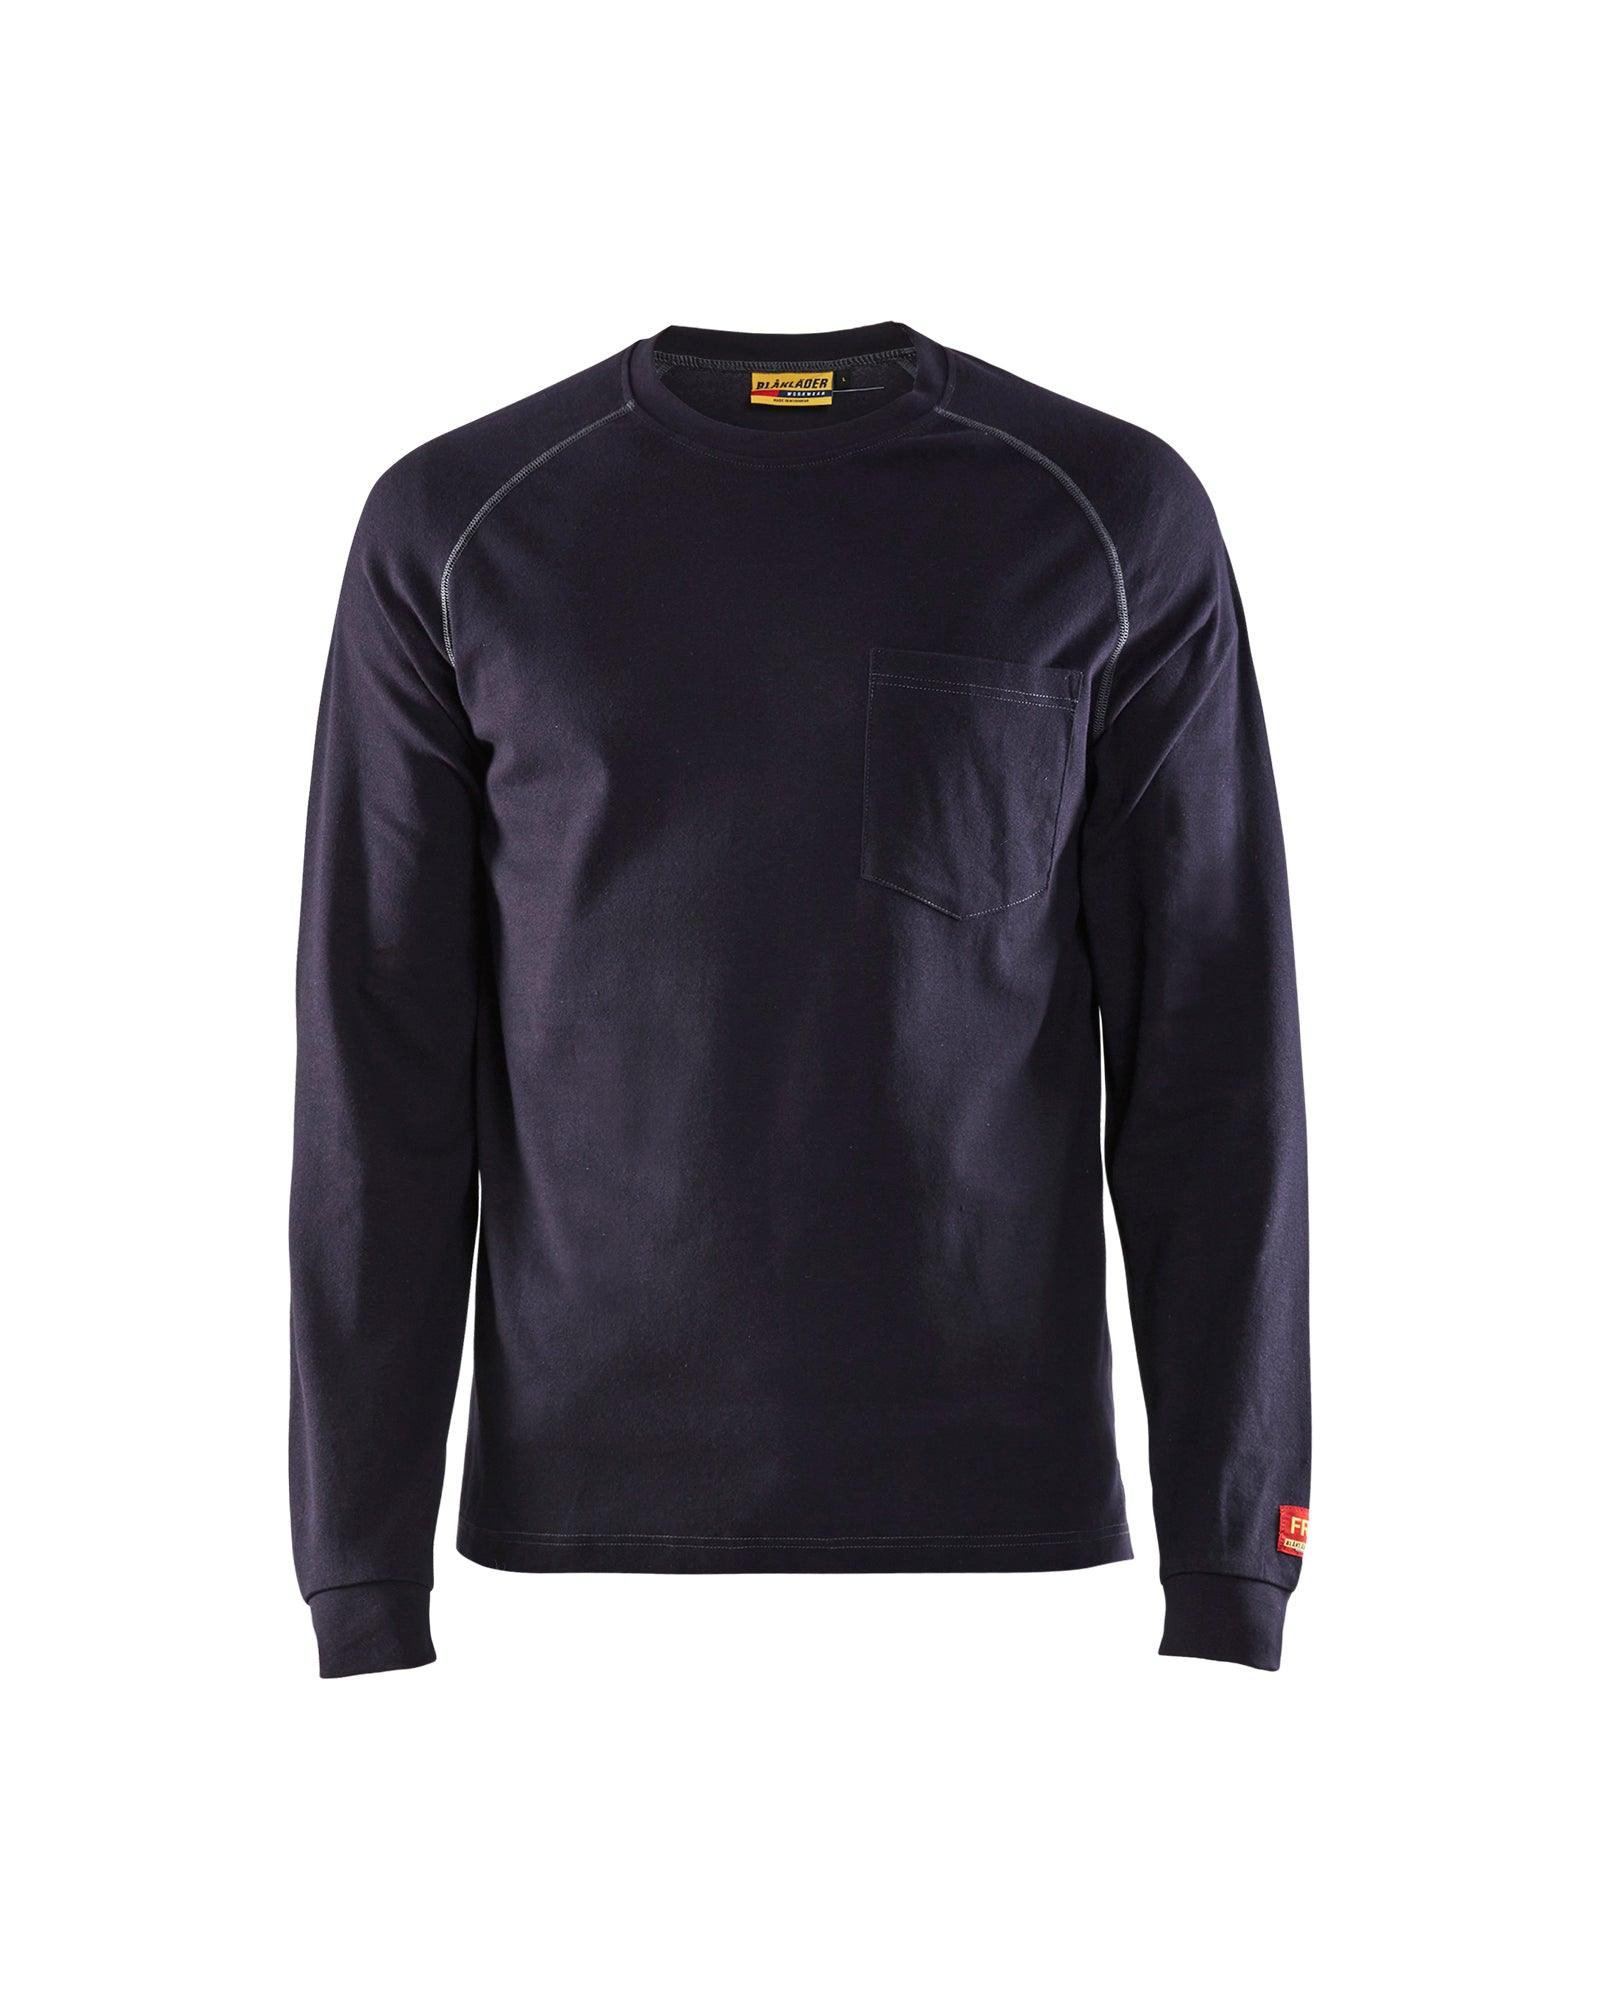 Blaklader 3493 Flame Resistant Long Sleeve T-Shirt - Navy Blue - Trusted Gear Company LLC